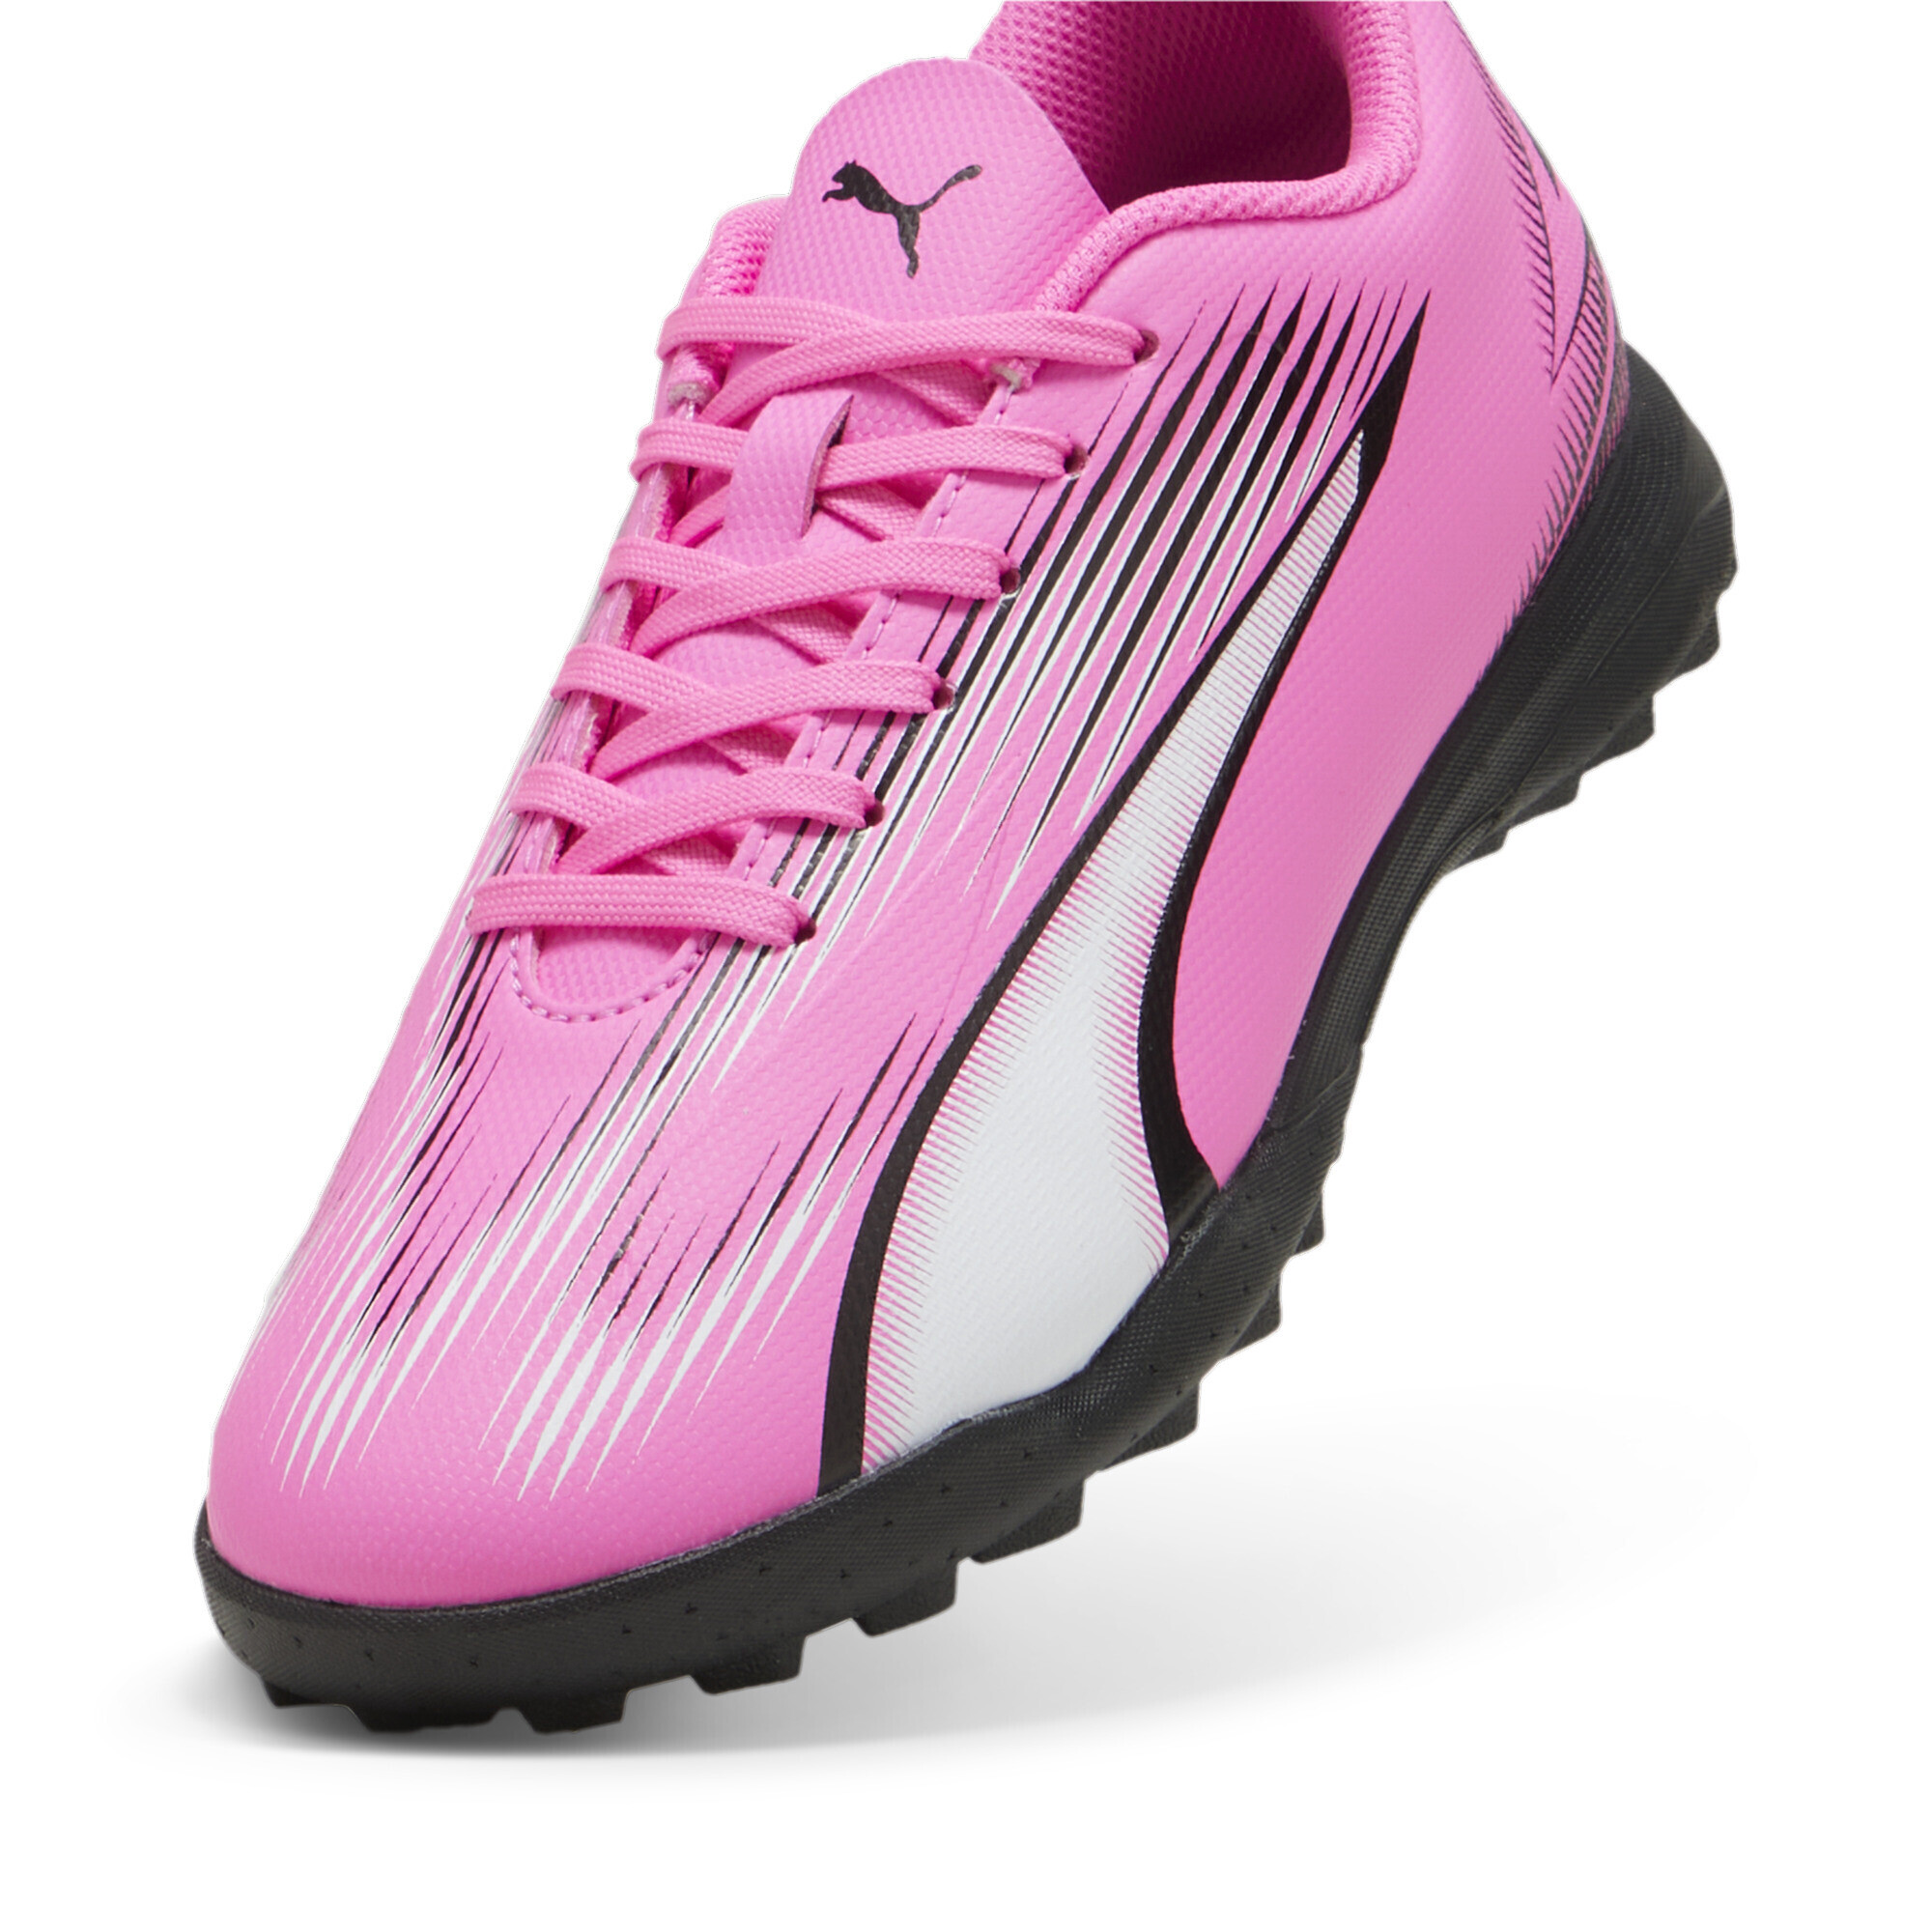 PUMA ULTRA PLAY TT Youth Football Boots In Pink, Size EU 38